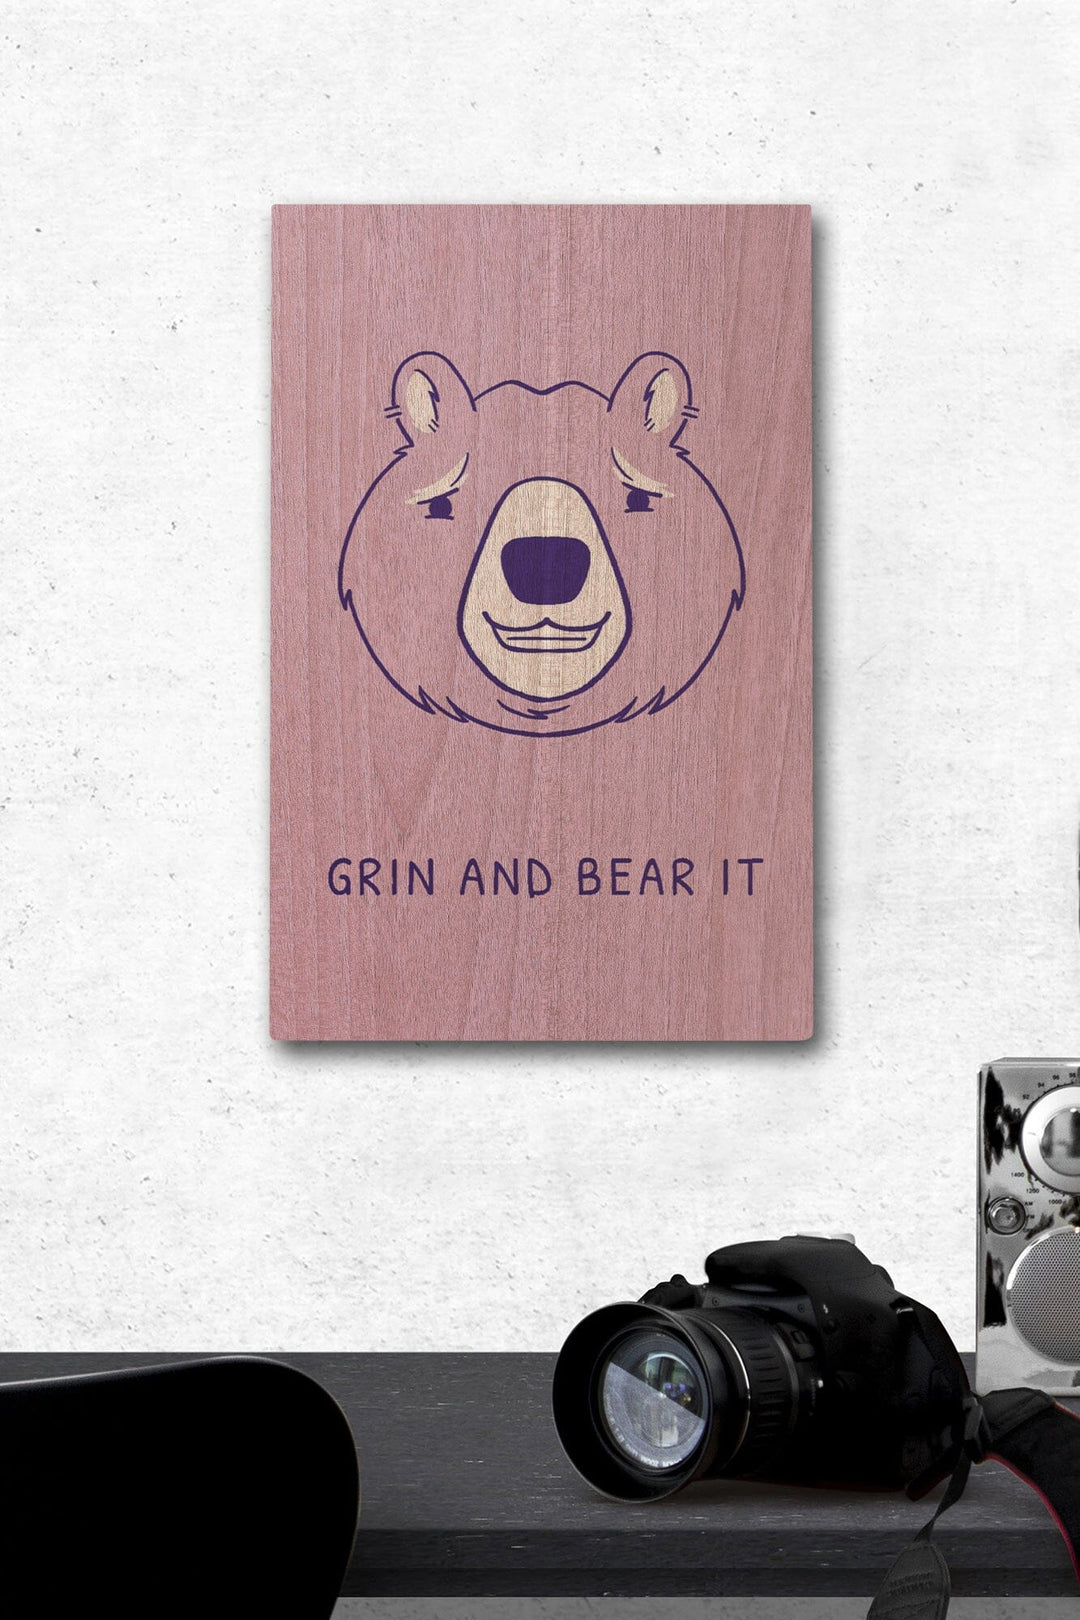 Humorous Animals Collection, Bear, Grin And Bear It, Wood Signs and Postcards Wood Lantern Press 12 x 18 Wood Gallery Print 